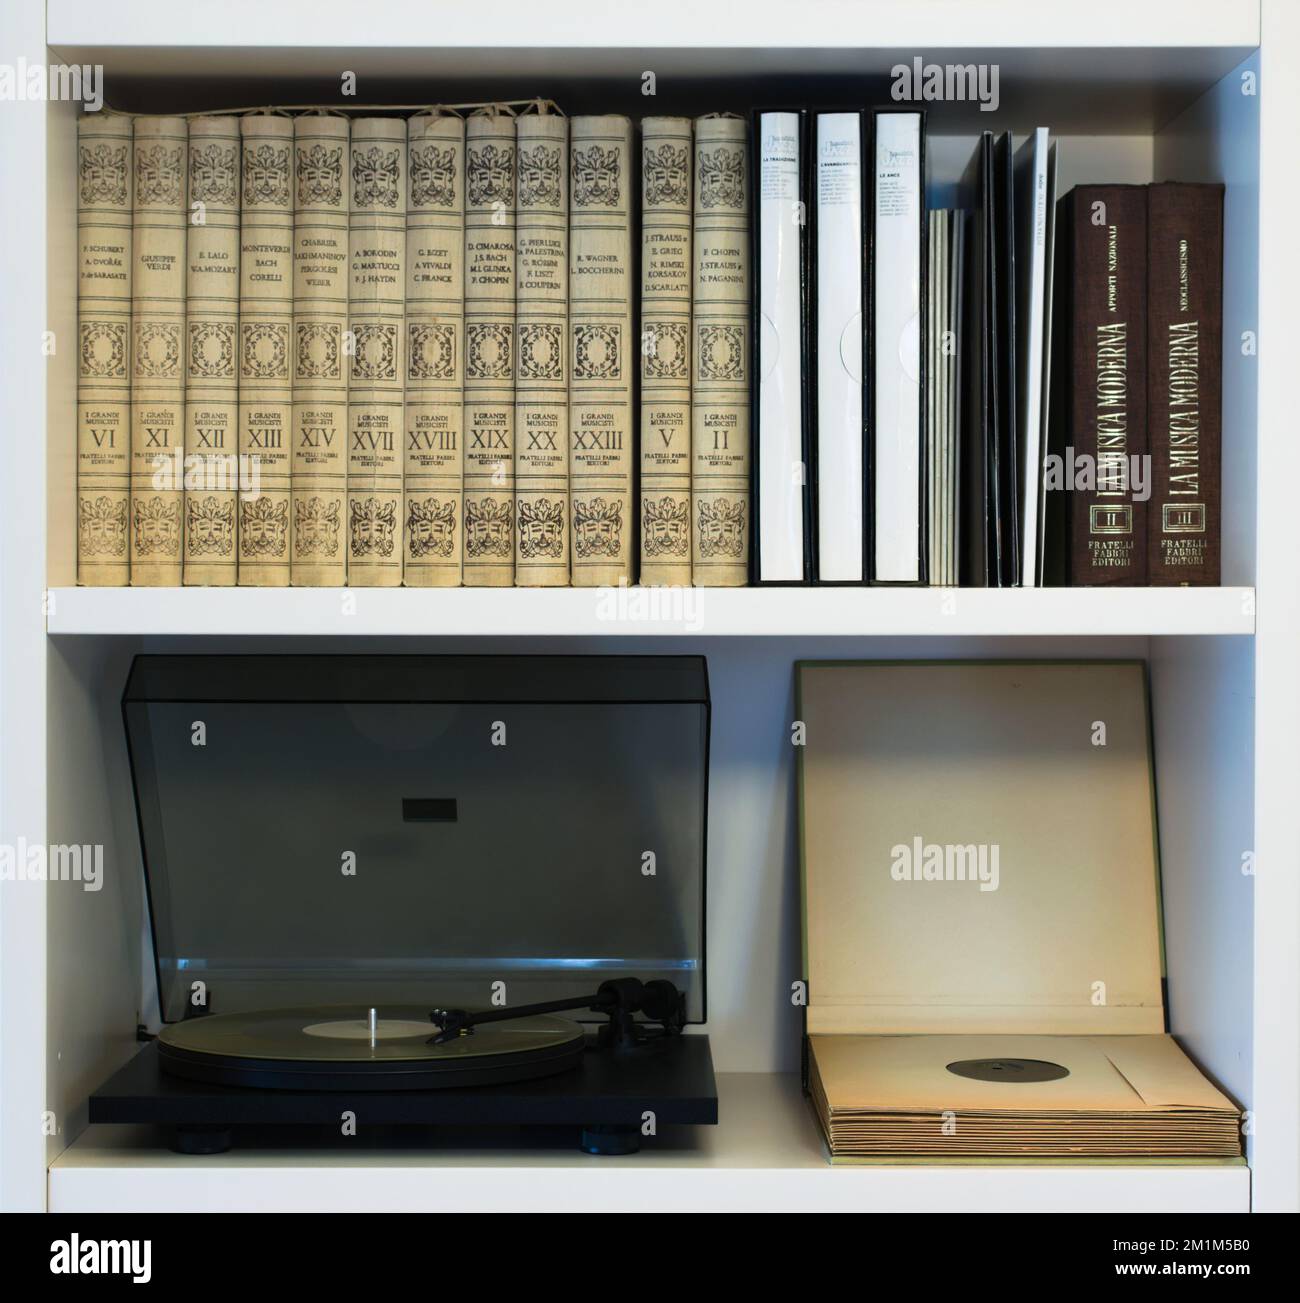 Modern record player spinning a recent vinyl record. Shown in a shelf together with a collection of old classical music records and modern vinyls. Stock Photo